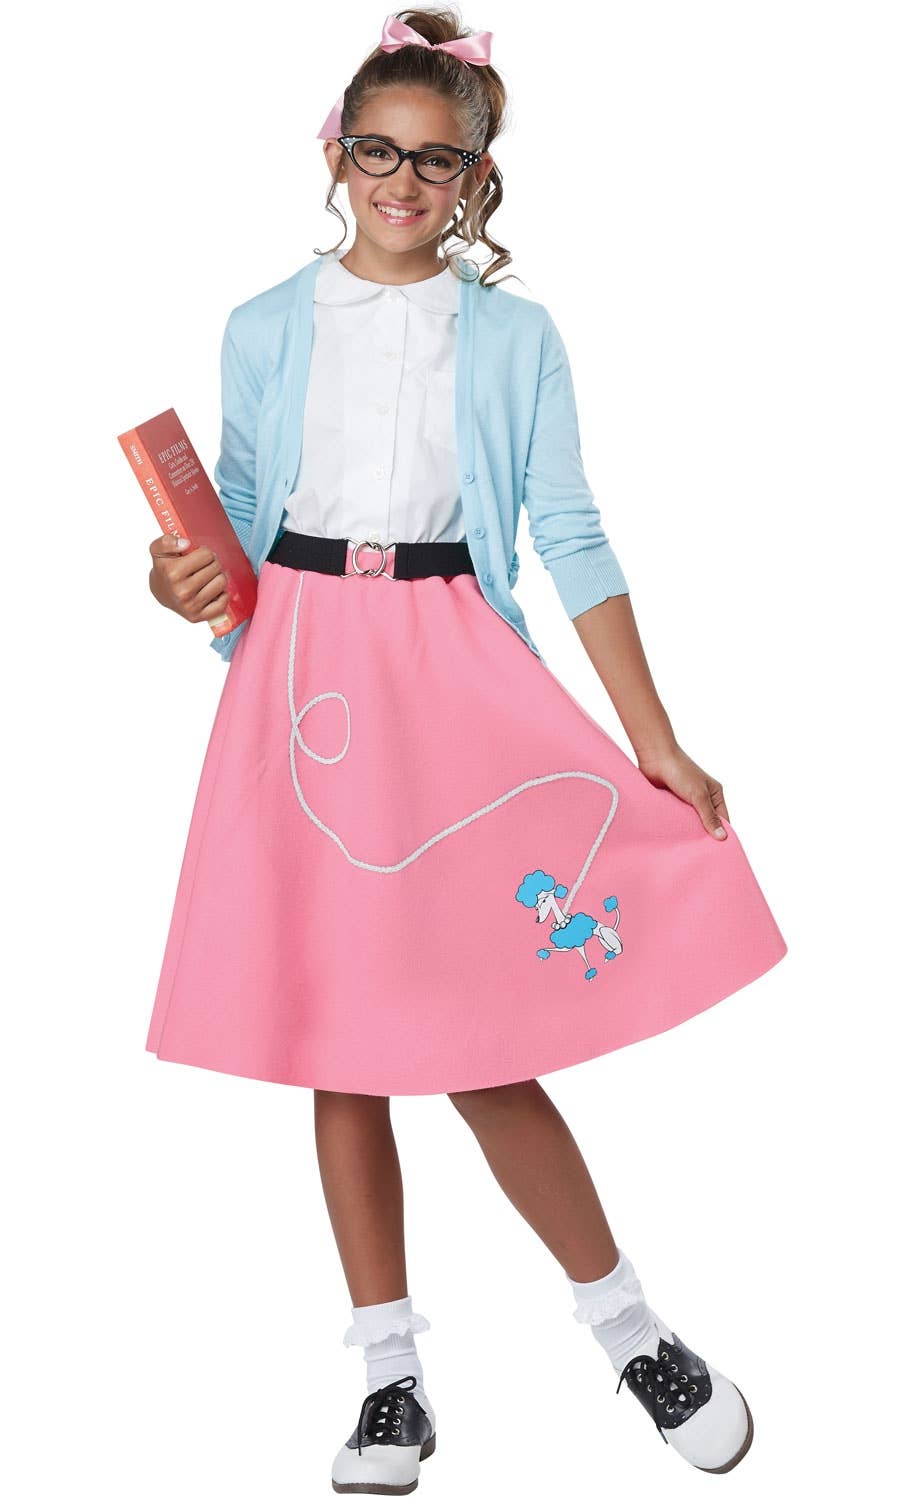 Pink Poodle 50s Skirt Rock and Roll Girls Costume - Main Image